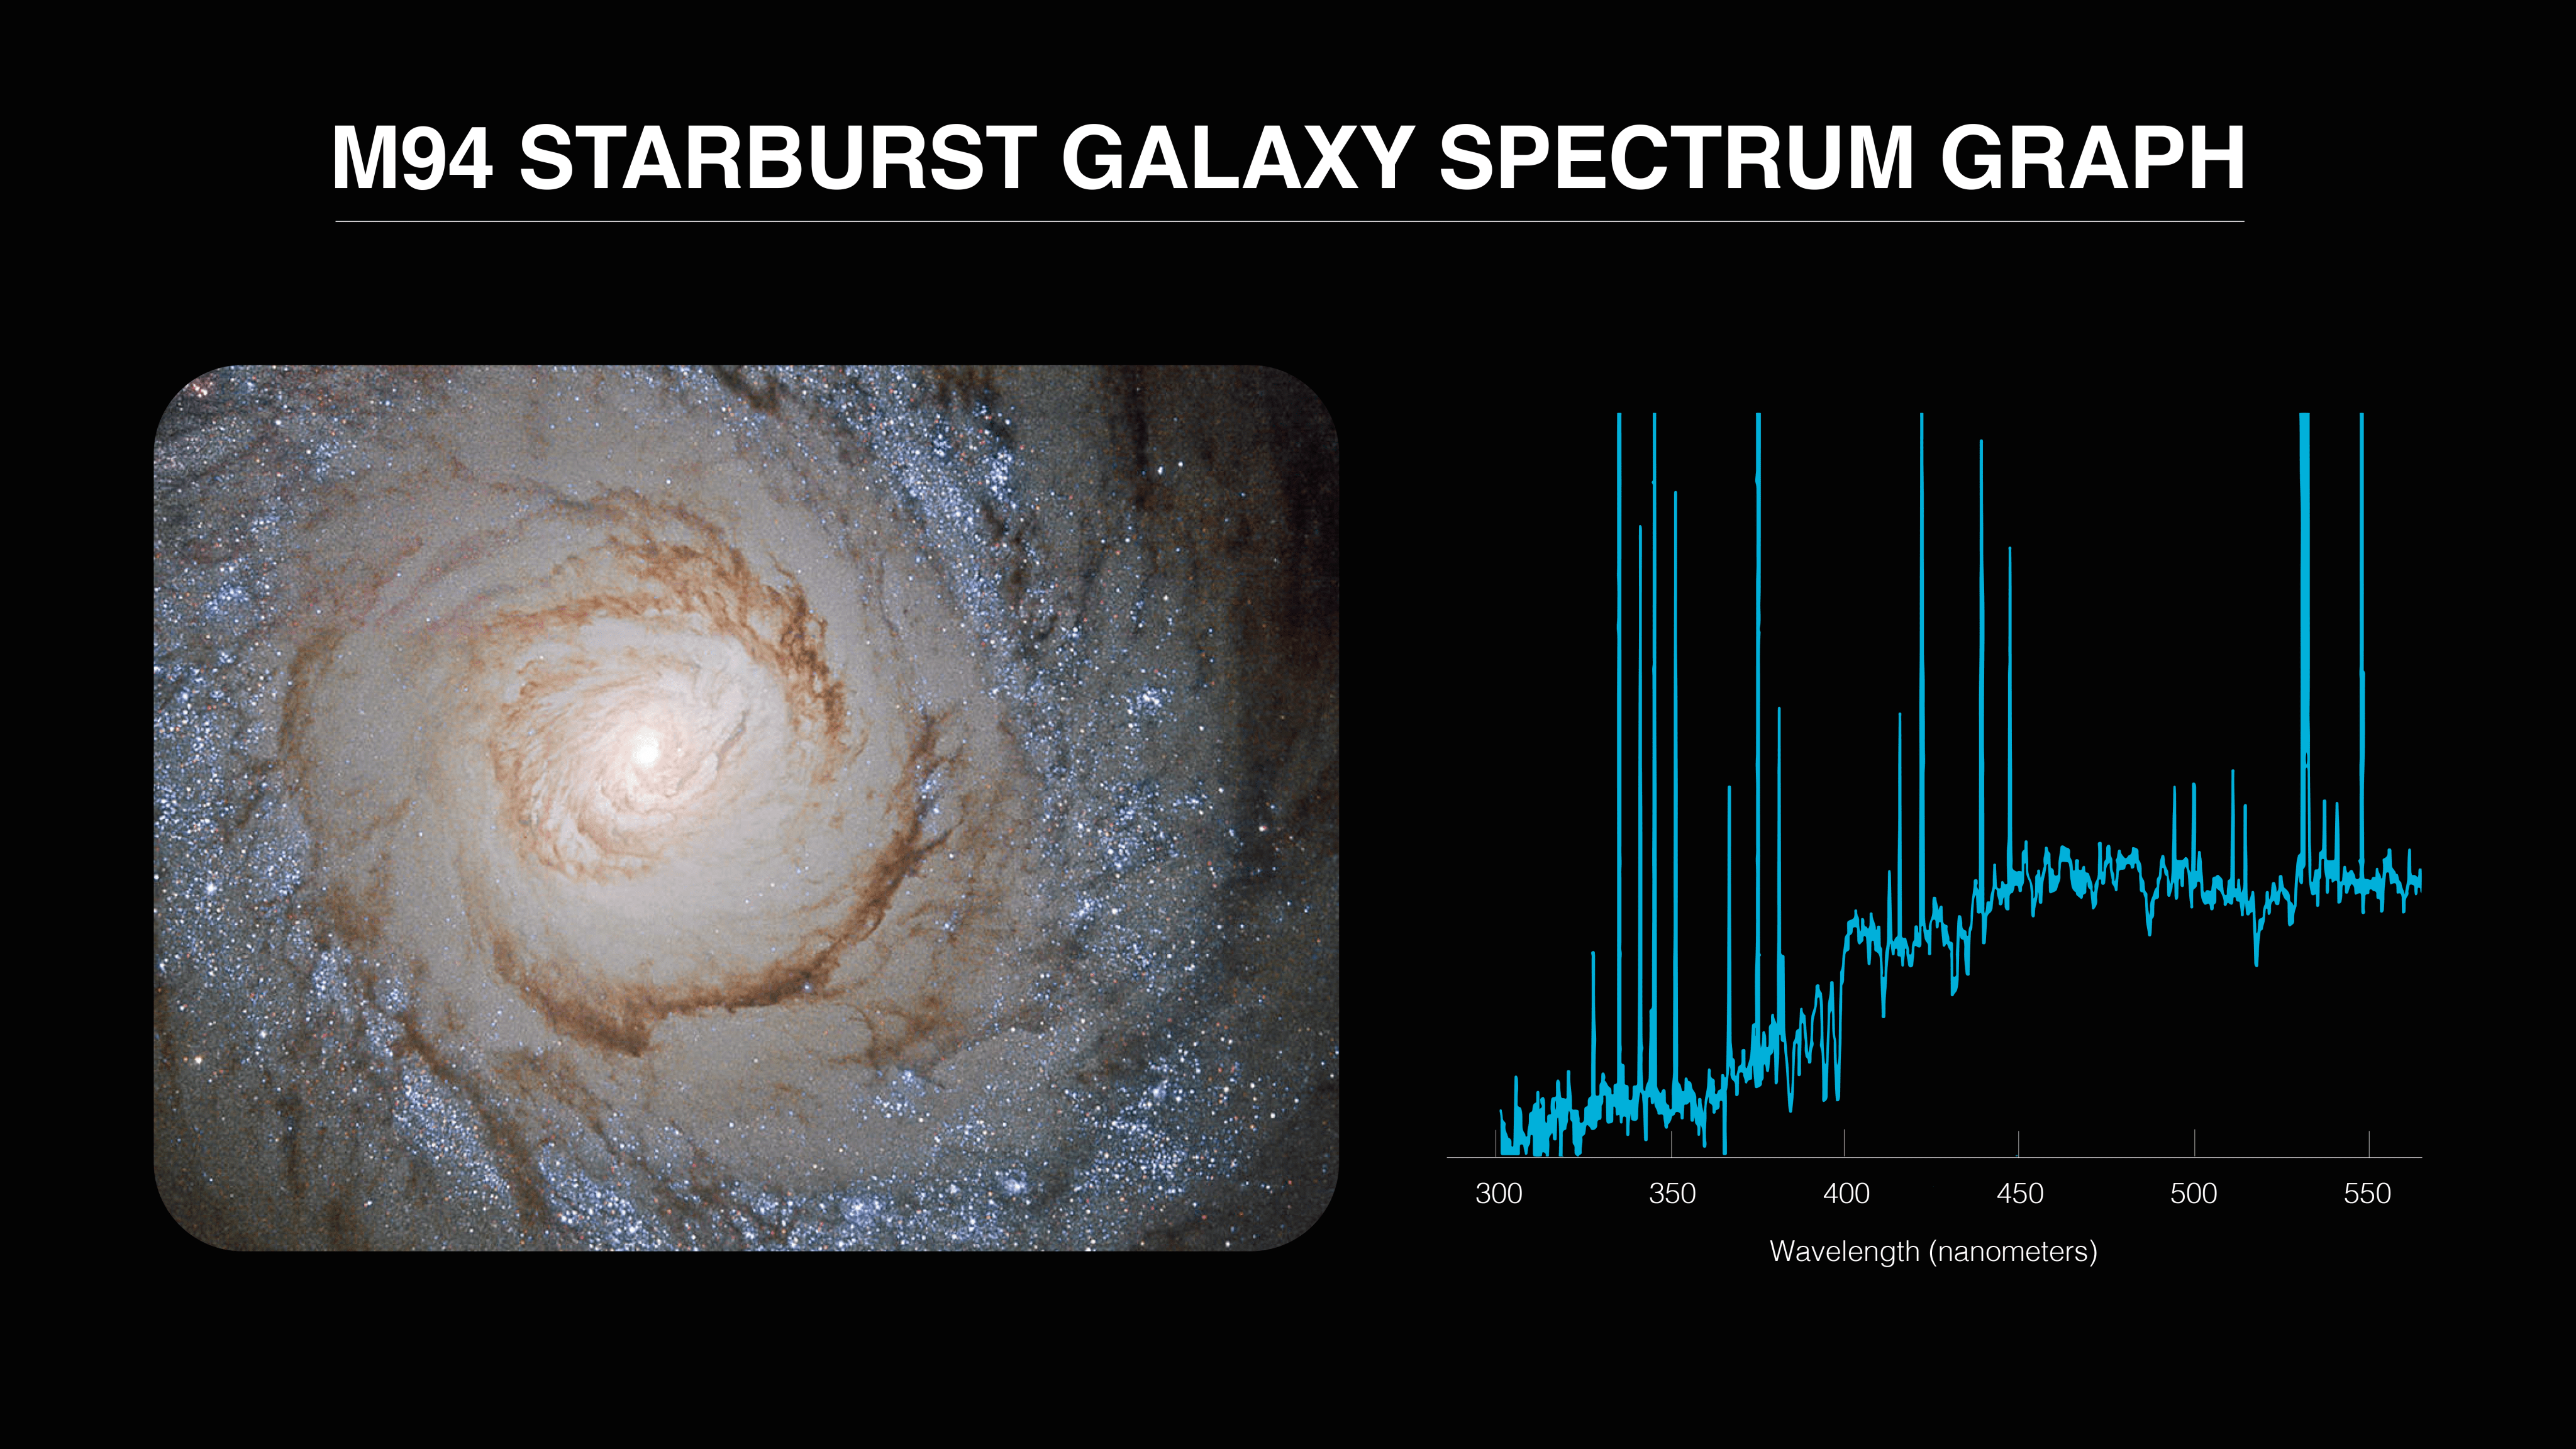 An image of a spiral galaxy with a blue graph to its right representing its spectra. There is a black background with white text reading "M94 Starburst Galaxy Spectrum Graph."